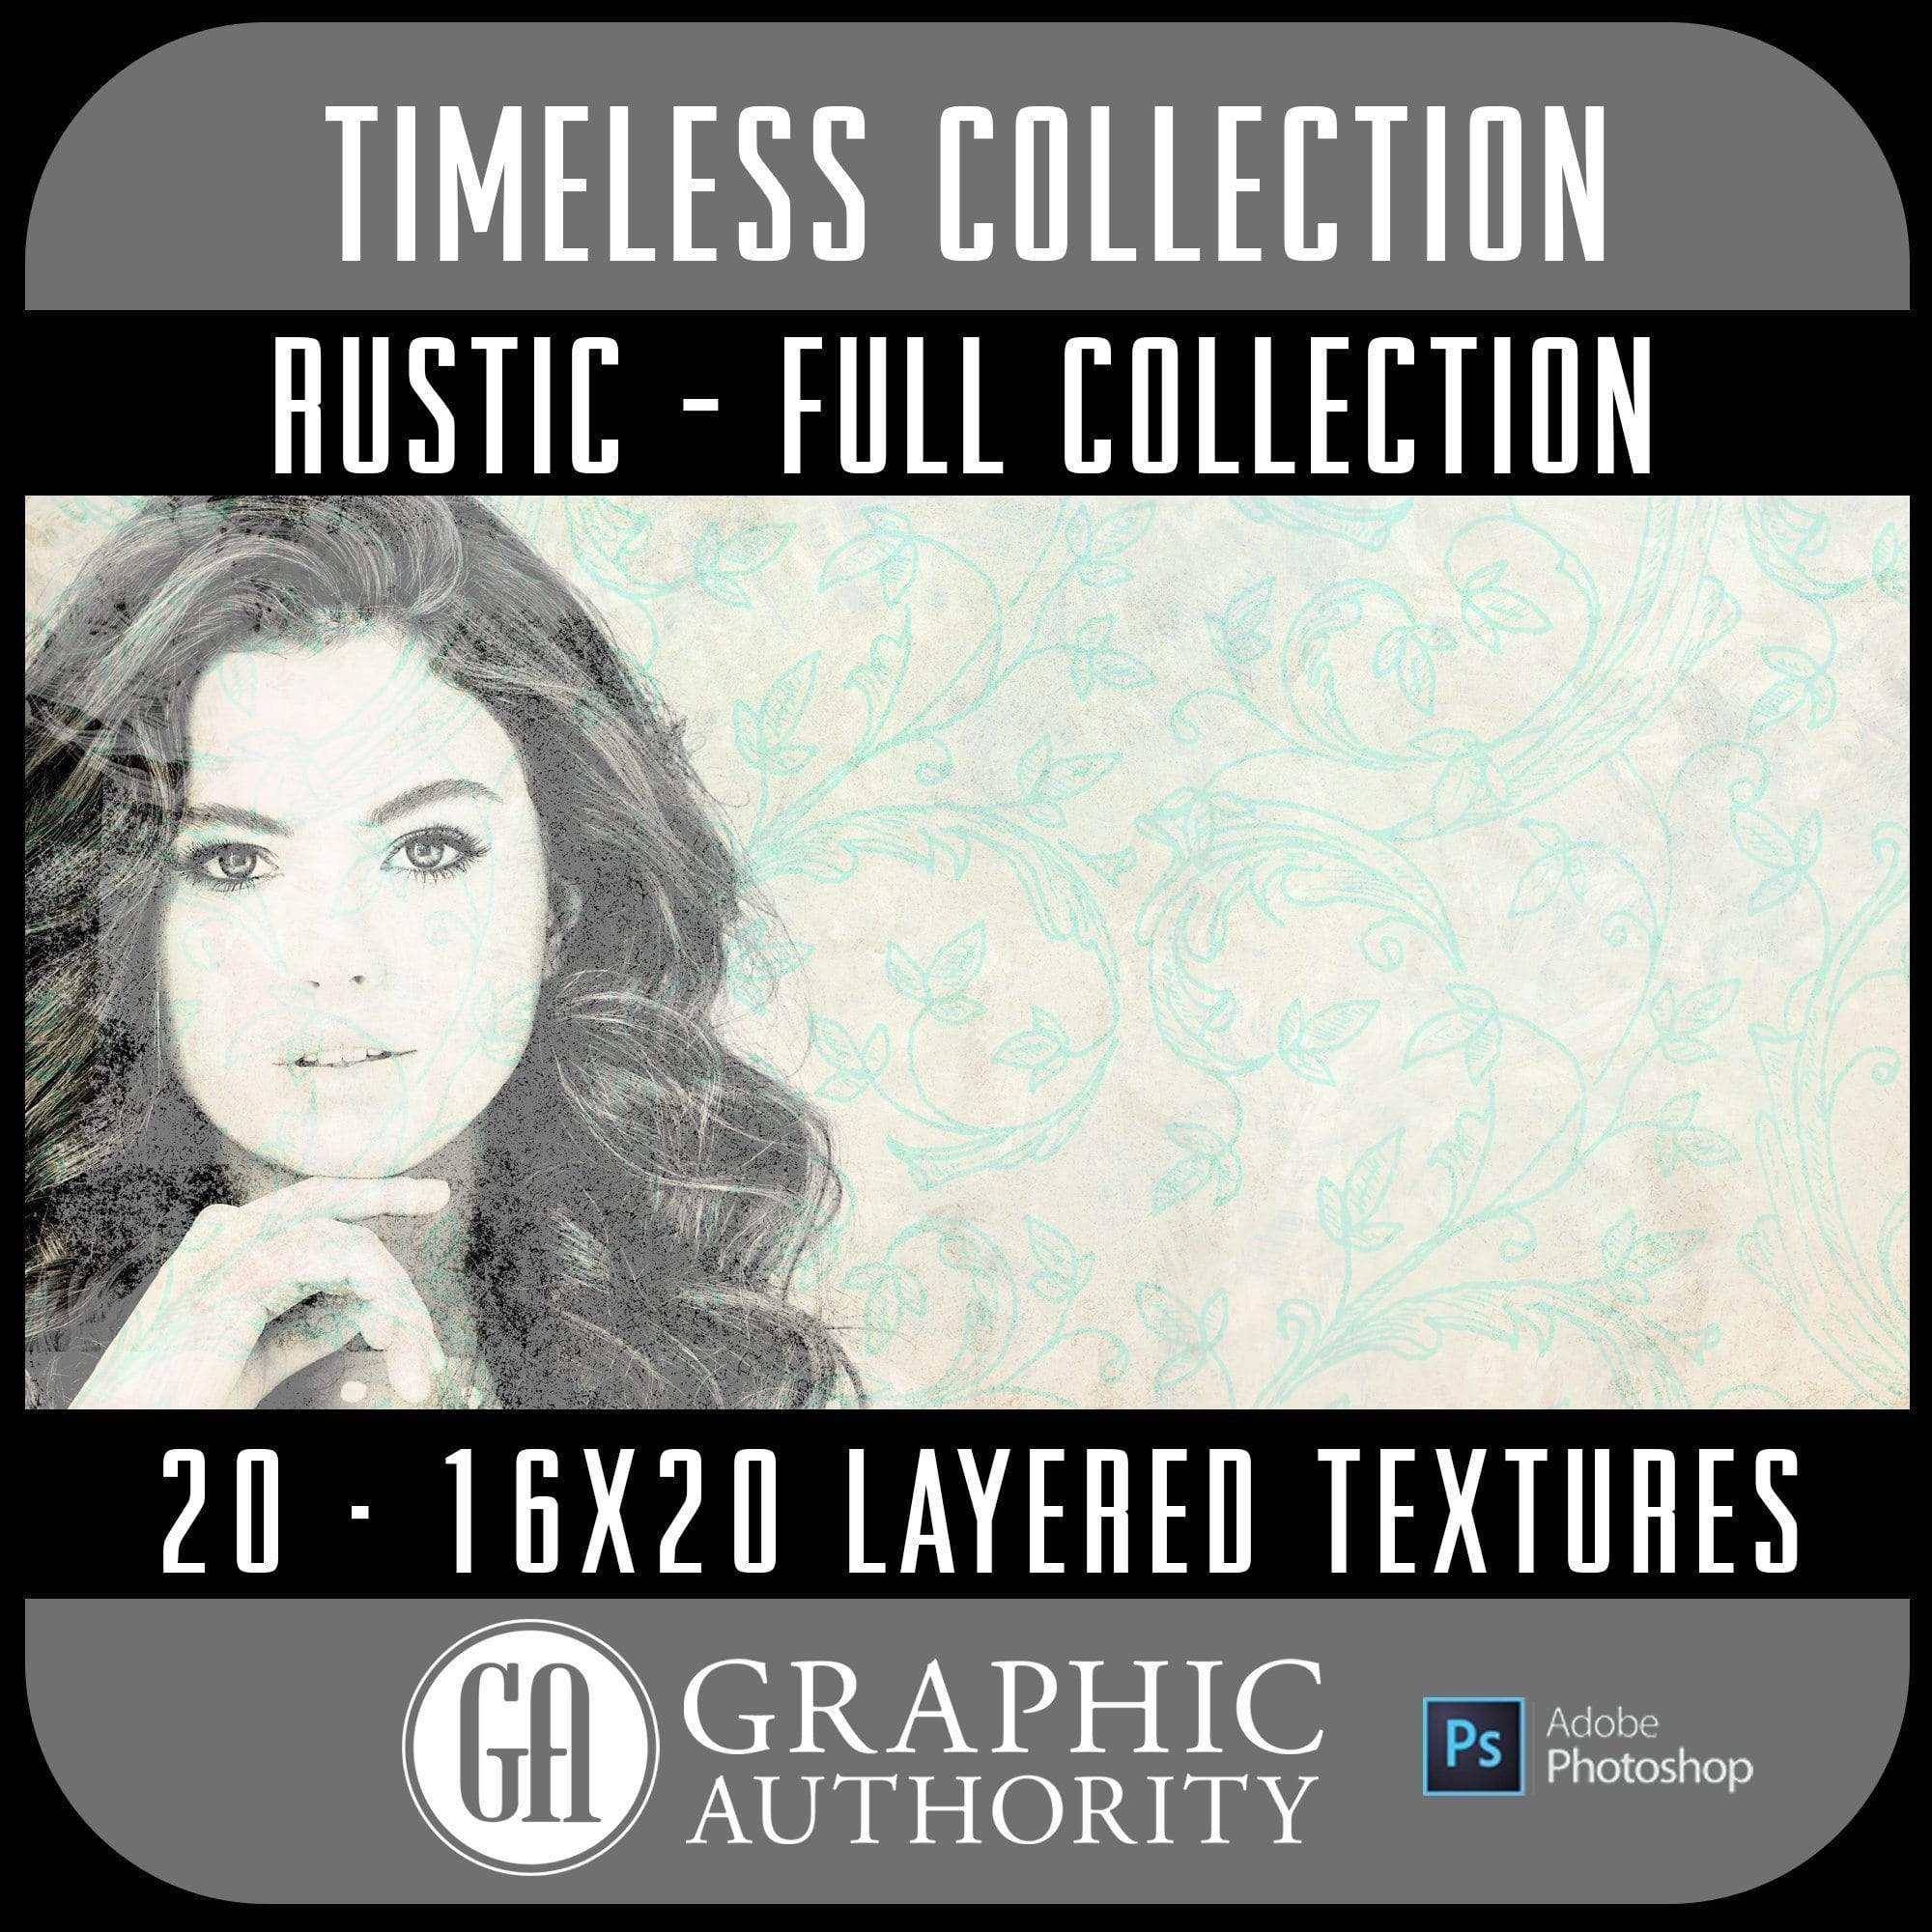 Timeless - Rustic - Layered Textures - Full Collection-Photoshop Template - Graphic Authority